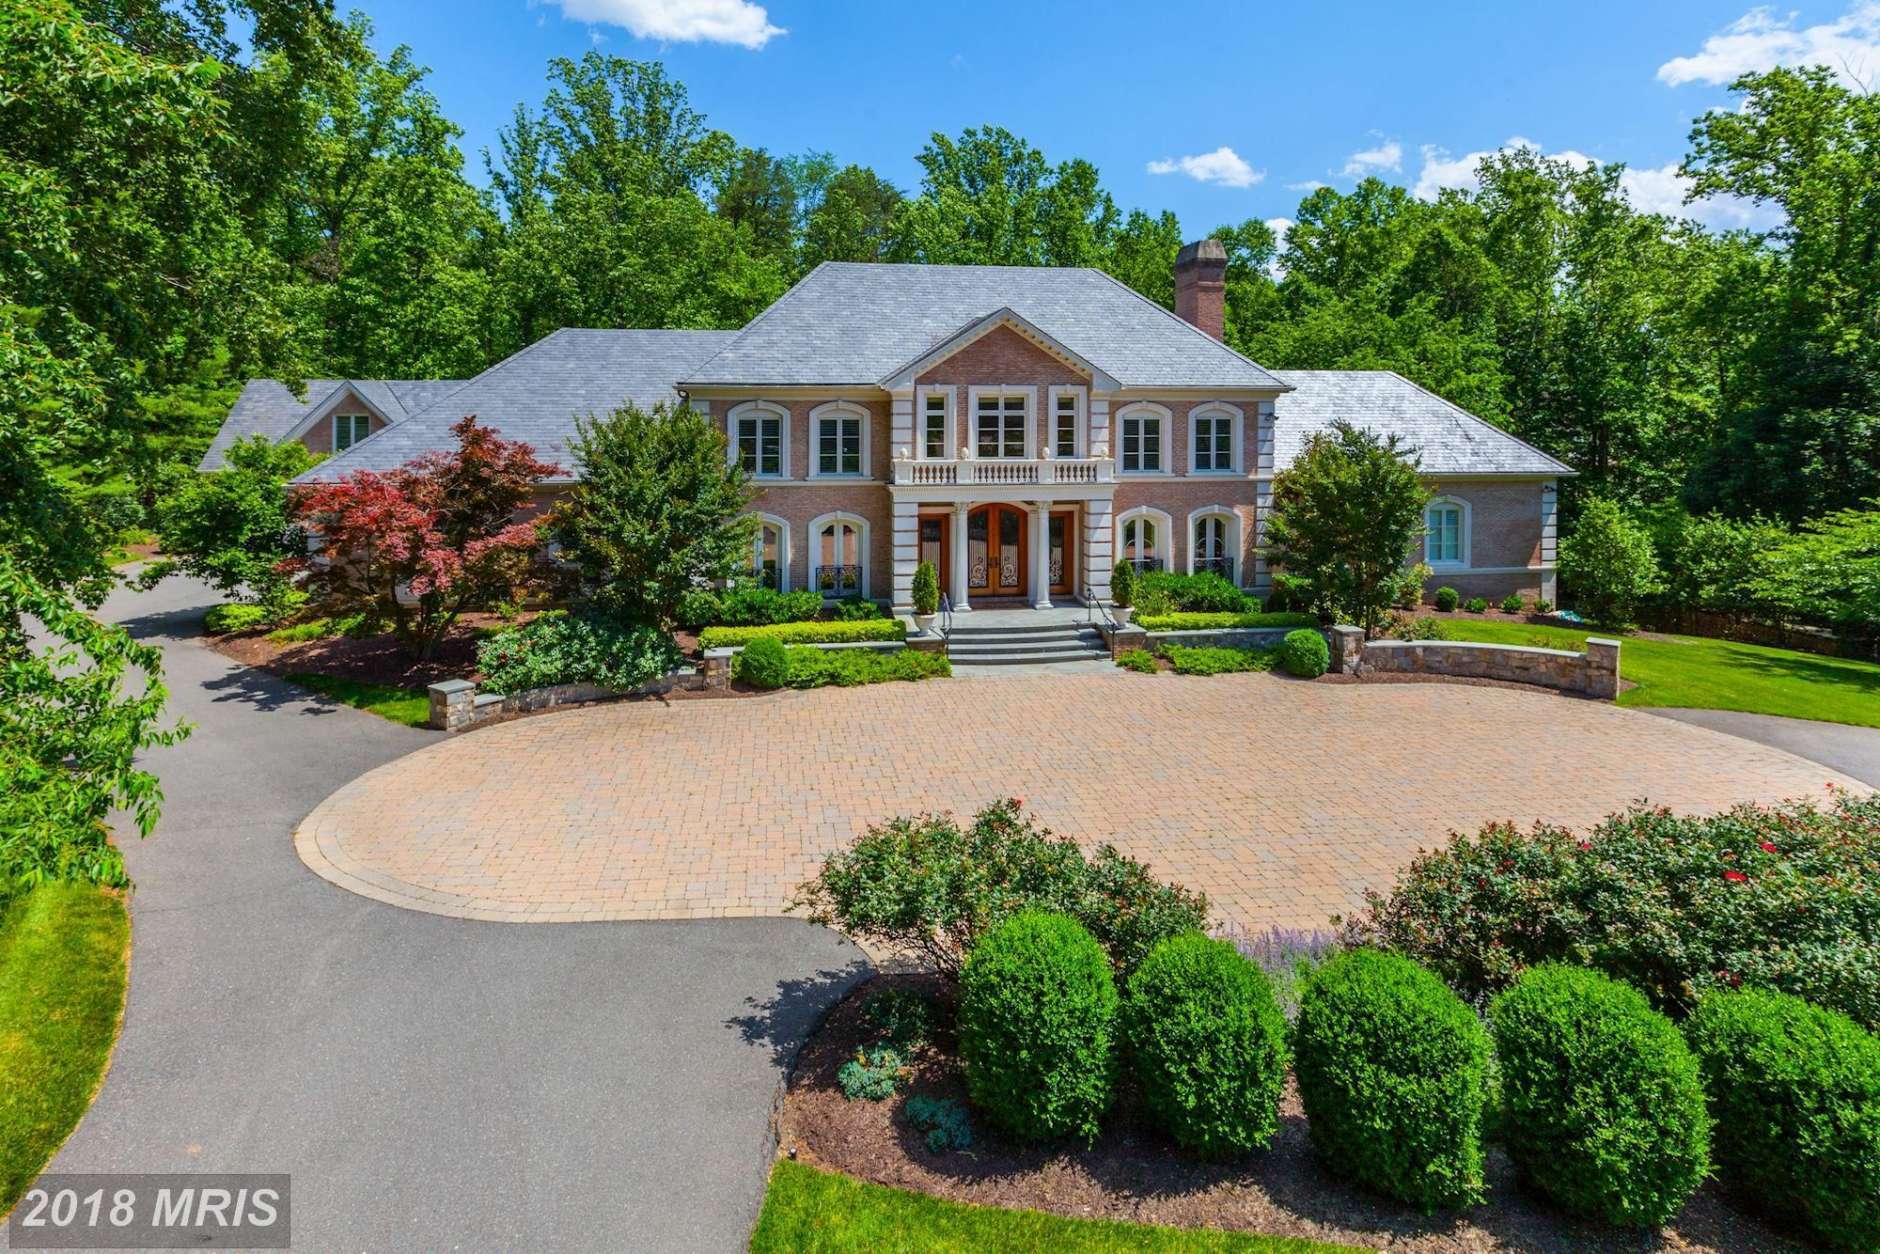 4. $3,650,000

10007 Bentcross Drive
Potomac, Maryland

This 2009 home boasts nine full bathrooms, five half bathrooms and six bedrooms. (Courtesy Bright MLS)